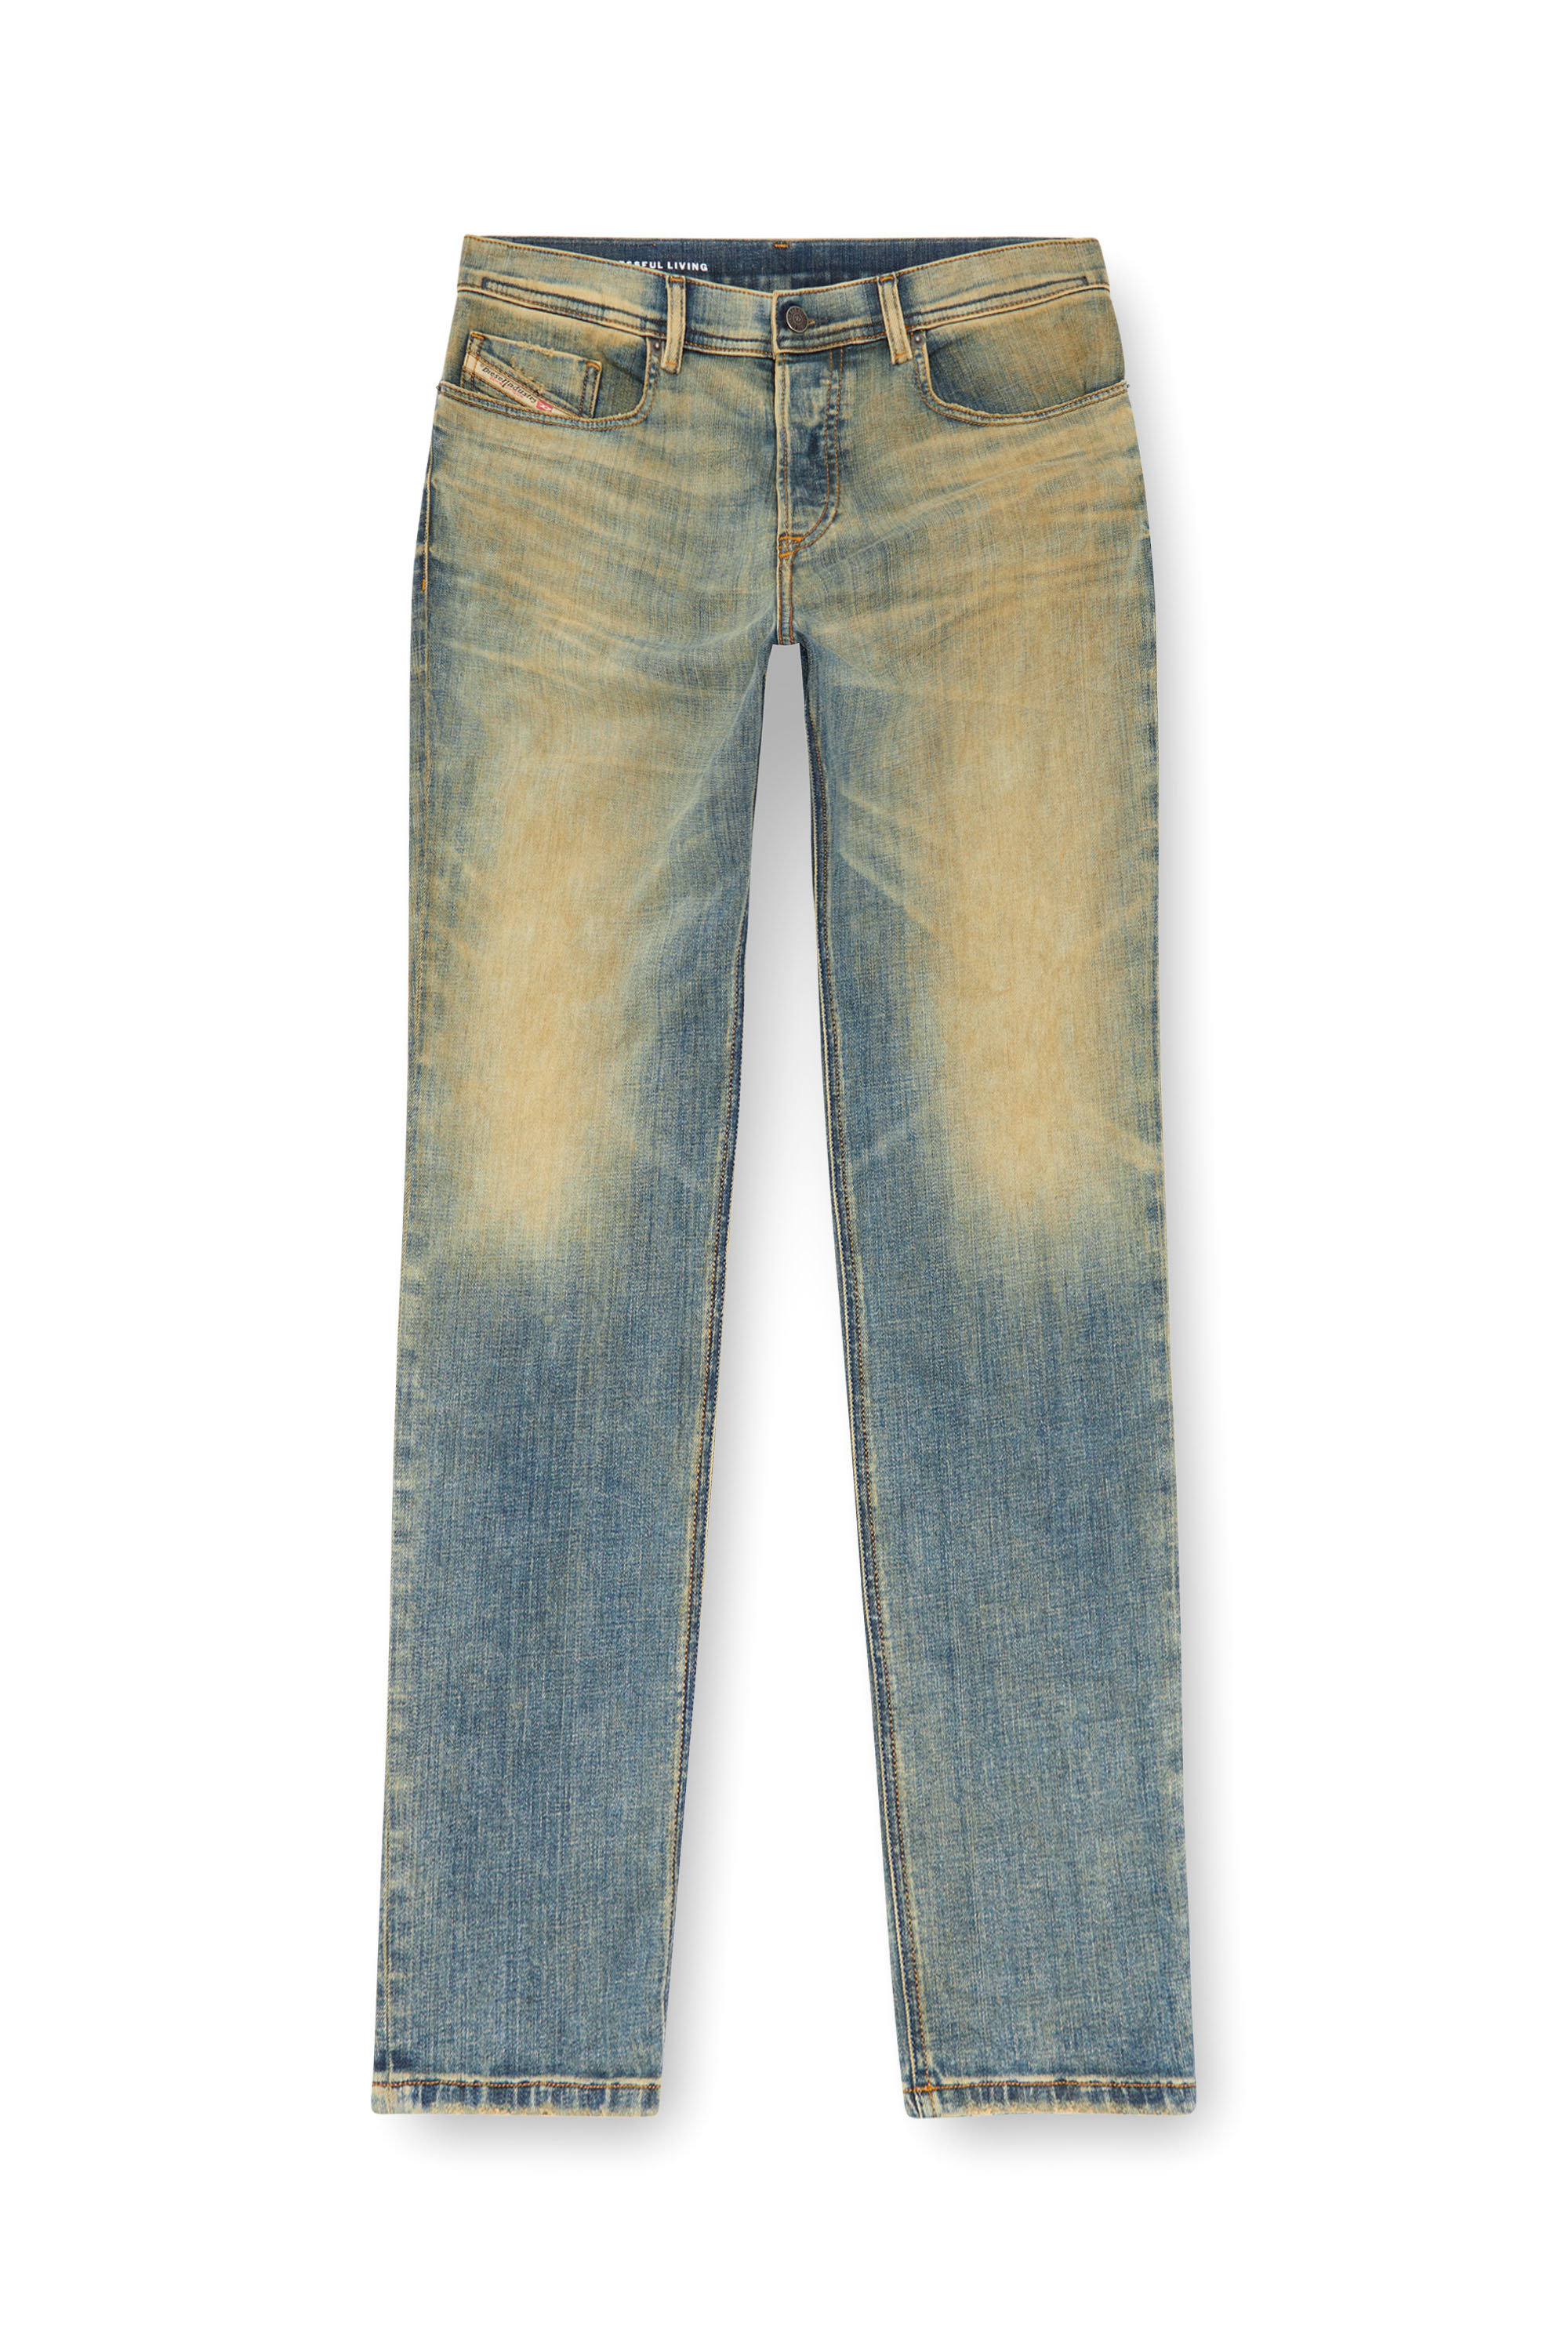 Diesel - Tapered Jeans 2023 D-Finitive 09J51, Hombre Tapered Jeans - 2023 D-Finitive in Azul marino - Image 3